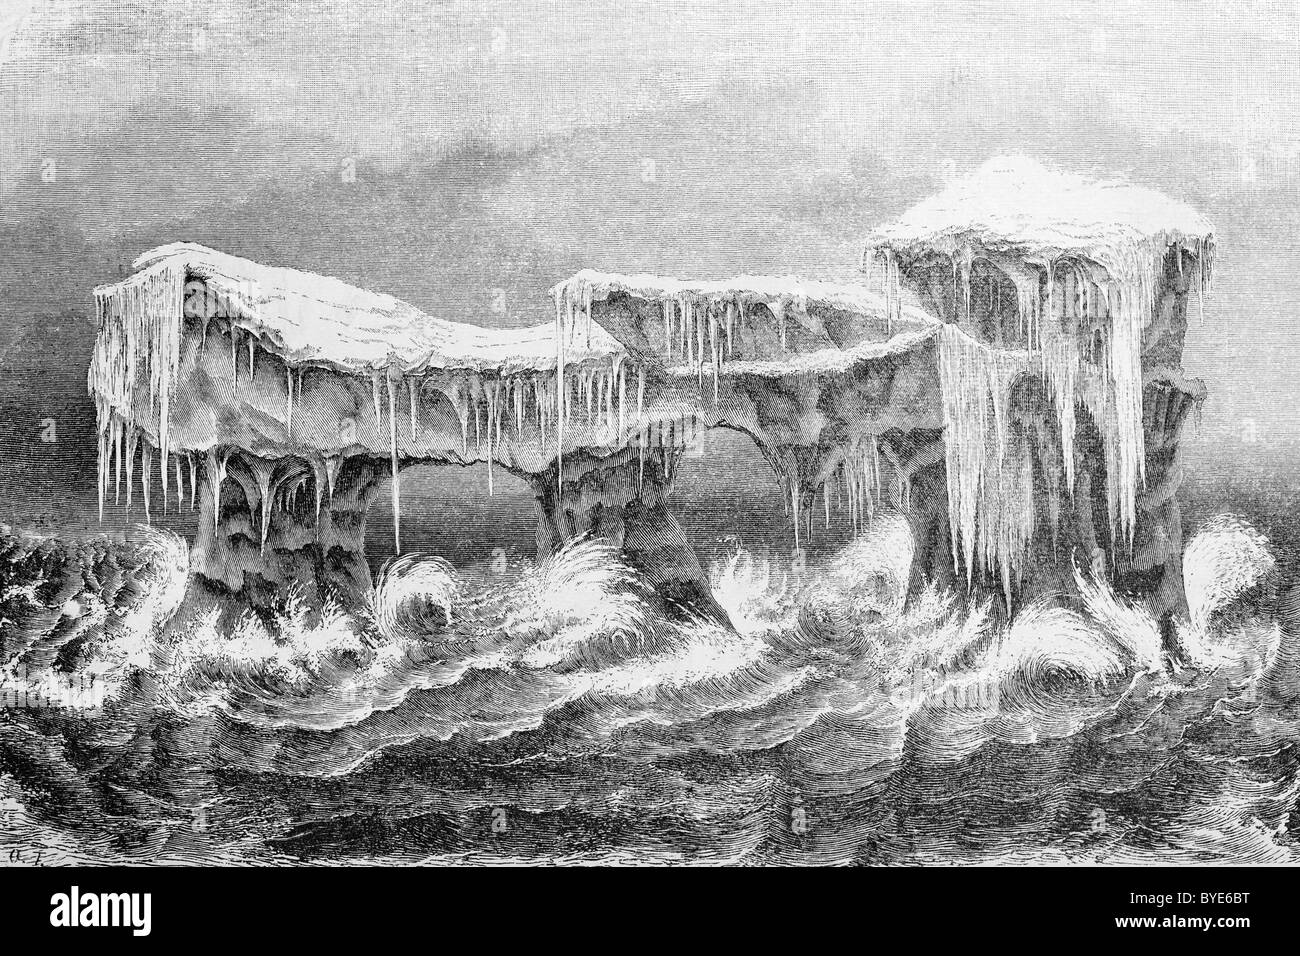 Iceberg in a roaring sea, Arctic, romantic book illustration from the 19th Century, steel engraving Stock Photo